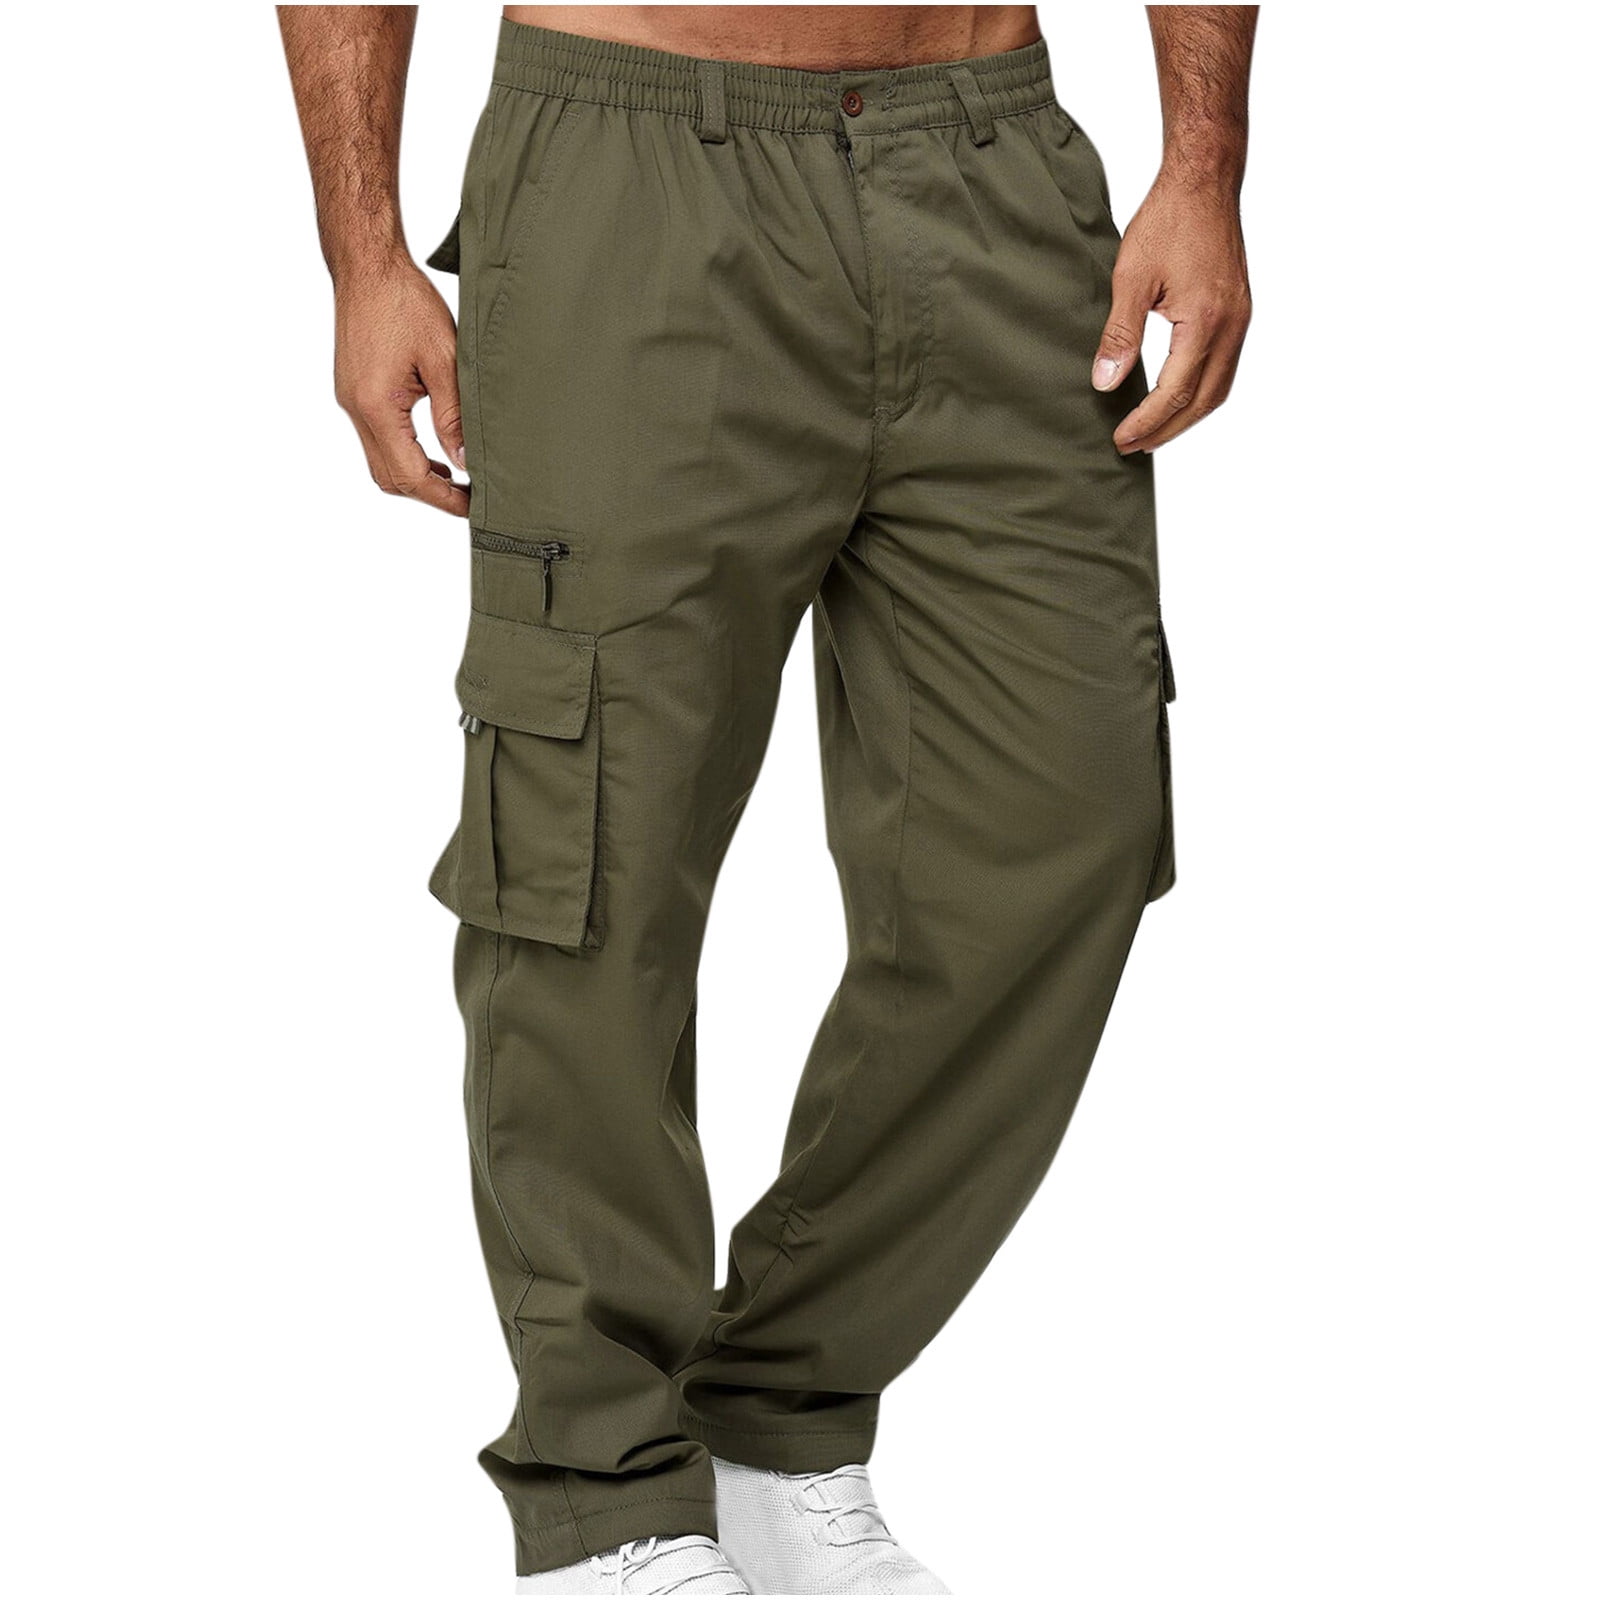 Mens Elastic Cargo Work Trousers Sweatpants Rugby Straight Track Pants Fitness 